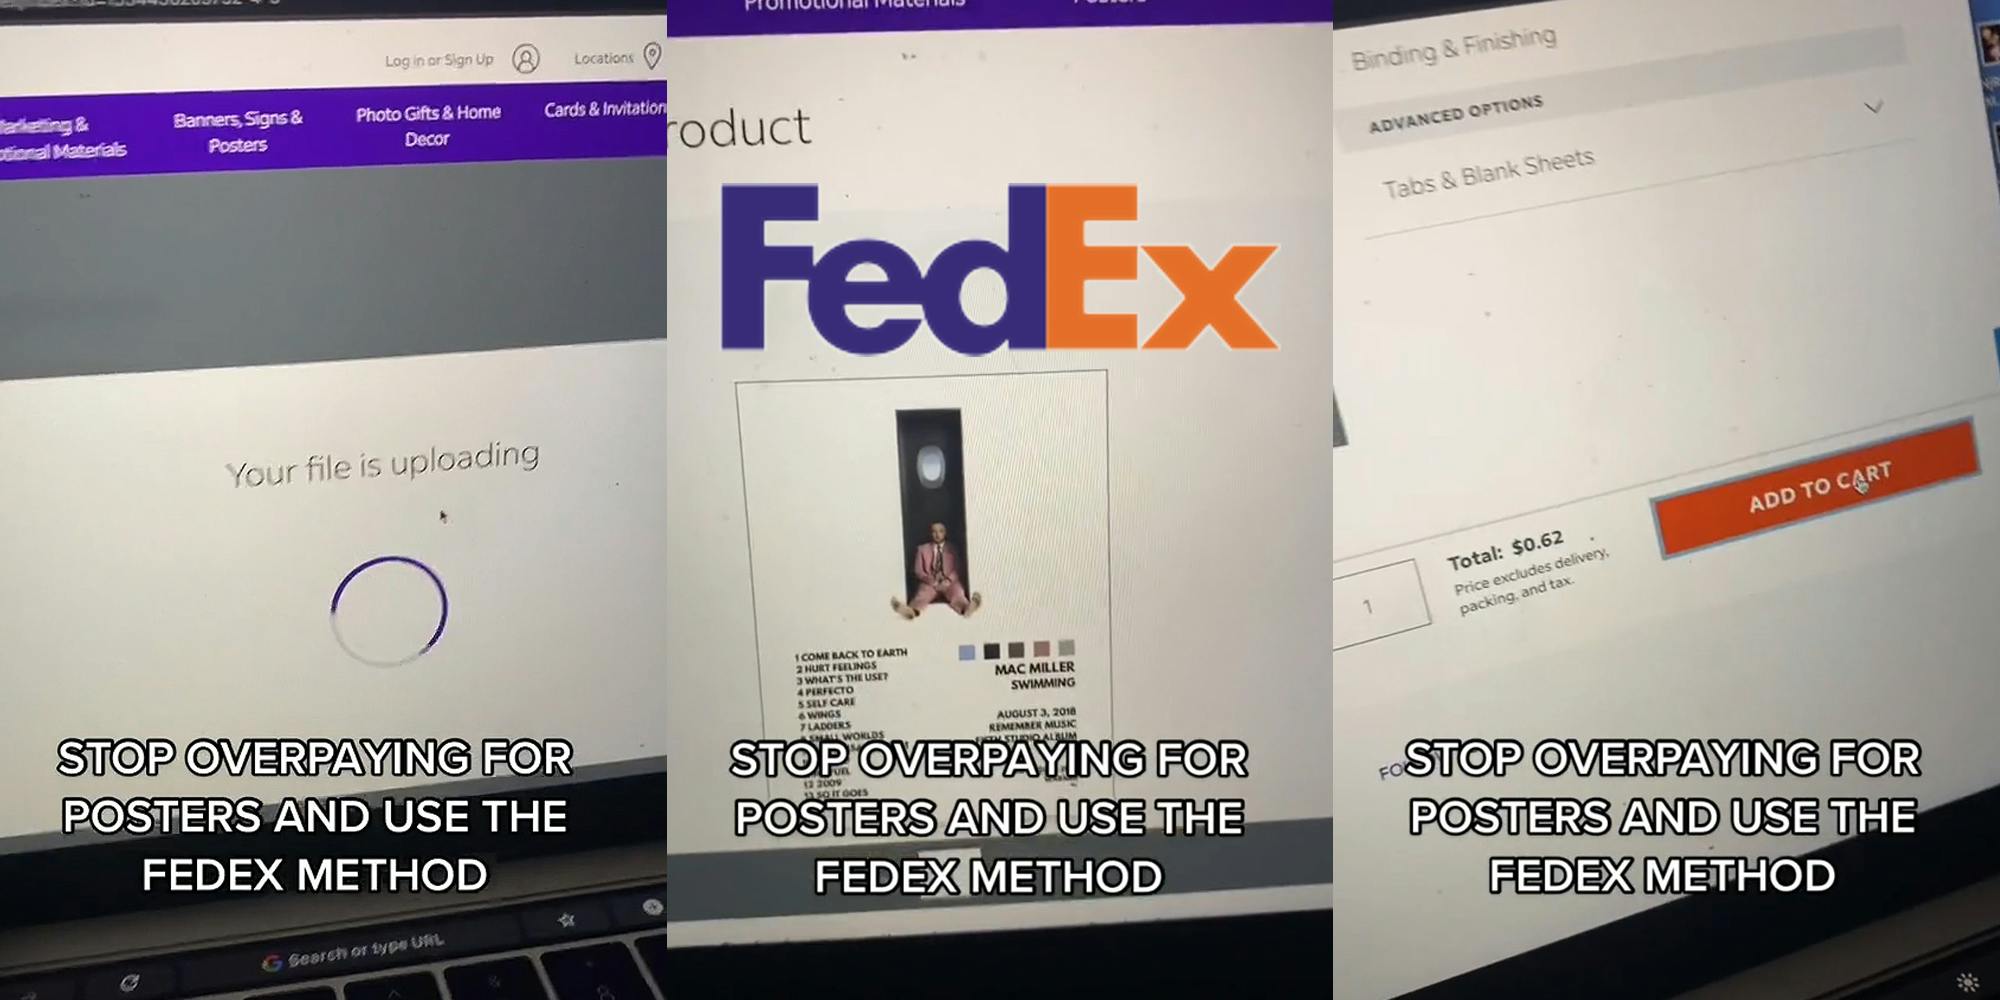 laptop on FedEx website "Your file is uploading" caption " STOP OVERPAYING FOR POSTERS AND USE THE REDEX METHOD" (l) laptop on FedEx website with poster and "FedEx" logo caption " STOP OVERPAYING FOR POSTERS AND USE THE REDEX METHOD" (c) laptop on FedEx website " Total $0.62 ADD TO CART "caption " STOP OVERPAYING FOR POSTERS AND USE THE REDEX METHOD" (r)